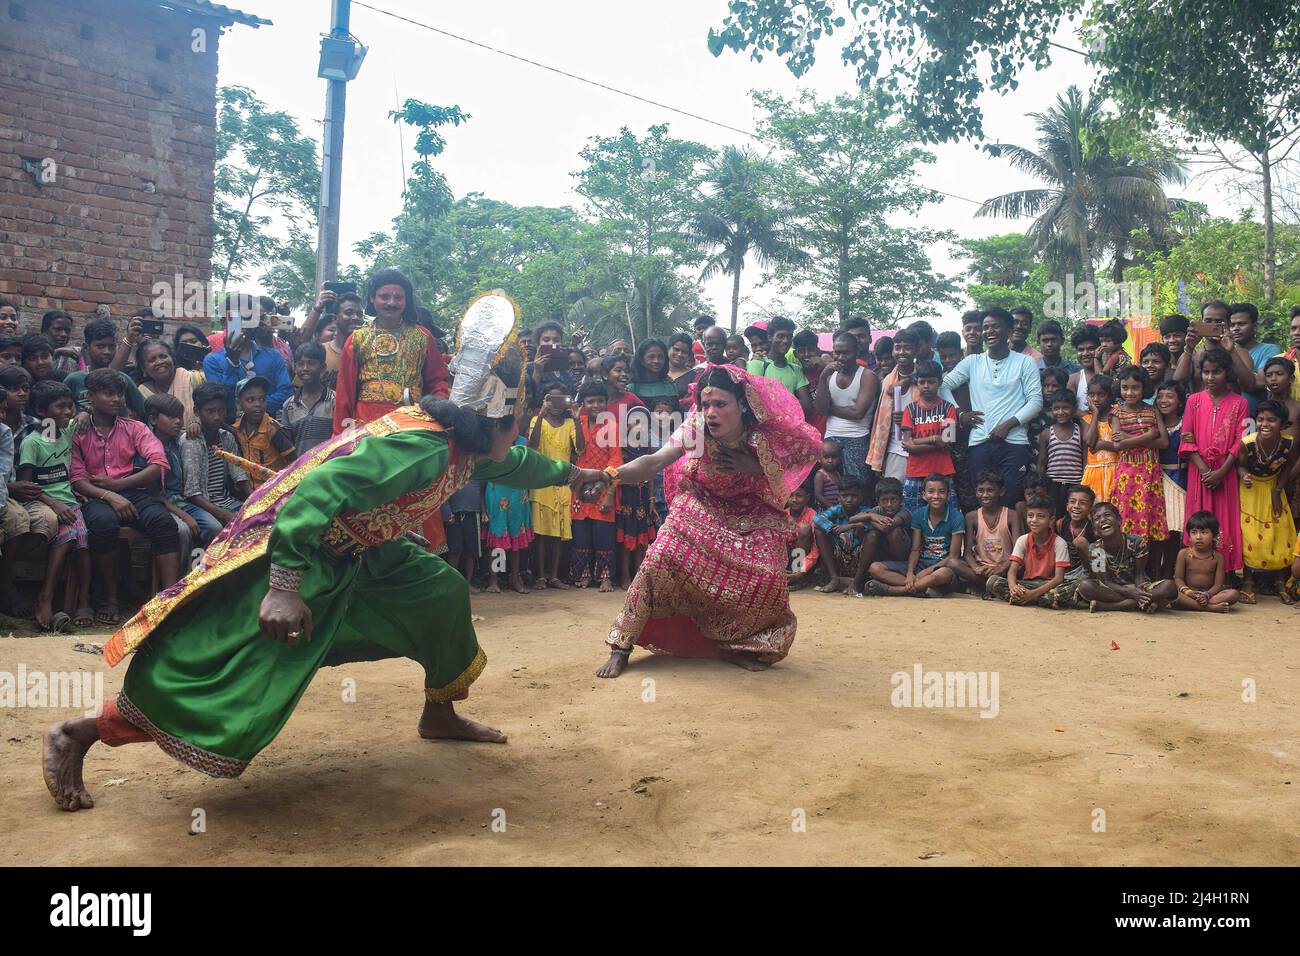 Cosplayers are seen performing during the Gajan festival at Hooghly. Gajan is a Hindu festival celebrated mostly in West Bengal as well as southern part of Bangladesh during the end of the month of ìChaitraî of the Bengali calendar followed by another festival named ìCharakî.  This festival is mainly worshipping Hindu Lord Shiva and Parvati before the start of the harvesting season.  Gajan is actually connected to the people who are related to the agricultural community, directly or indirectly. People celebrate by performing rituals such as face painting and cosplaying. Devotees dress up as Hi Stock Photo